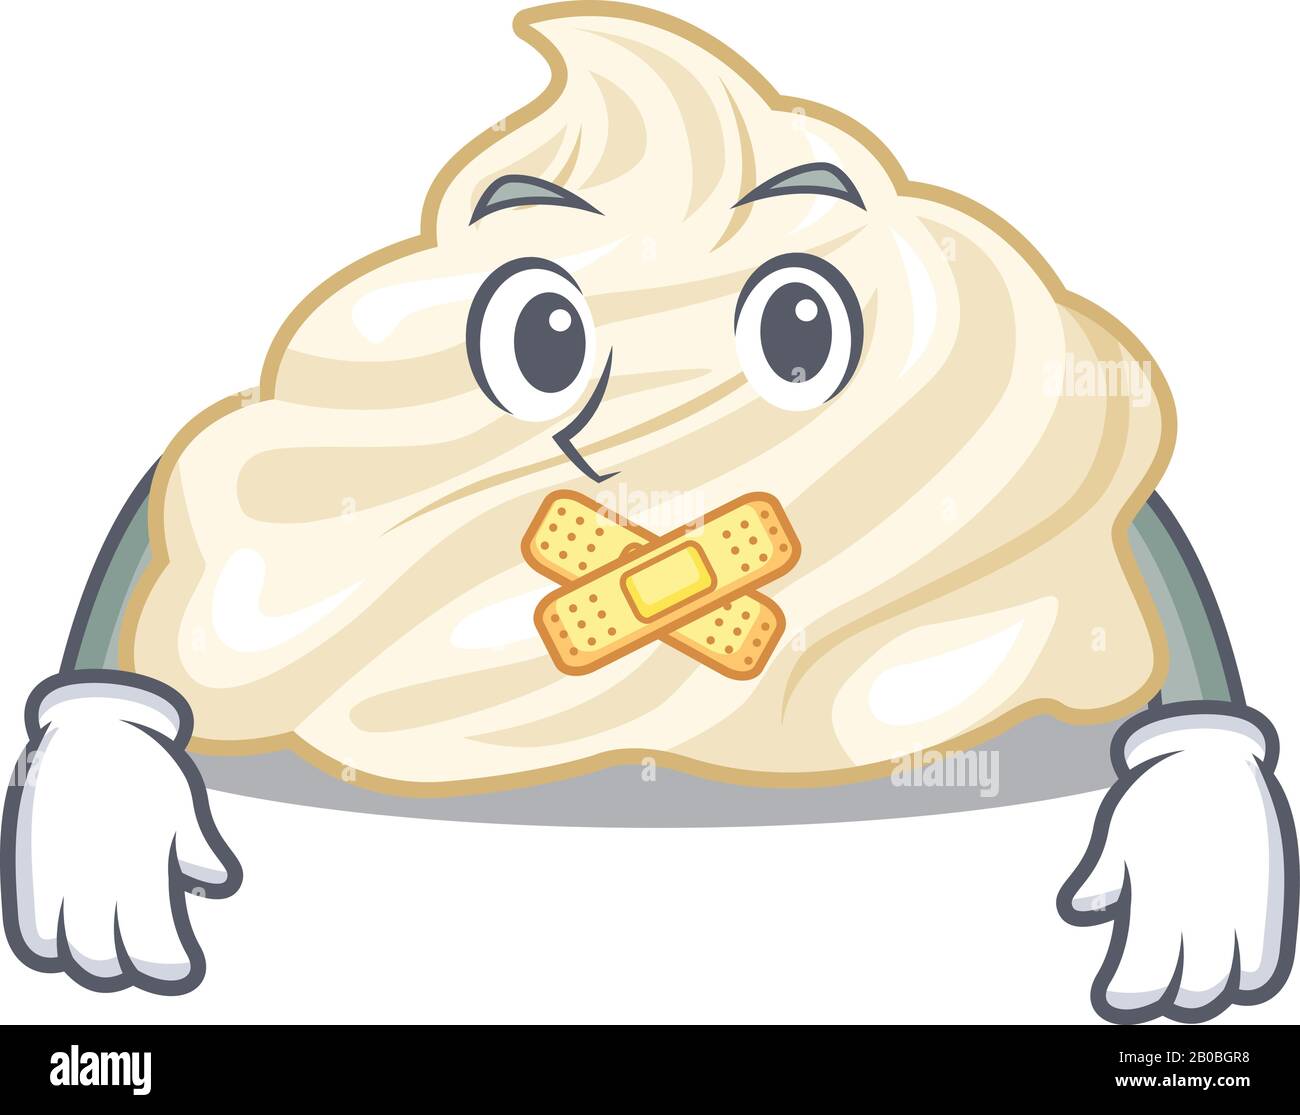 cartoon character design whipped cream making a silent gesture Stock Vector